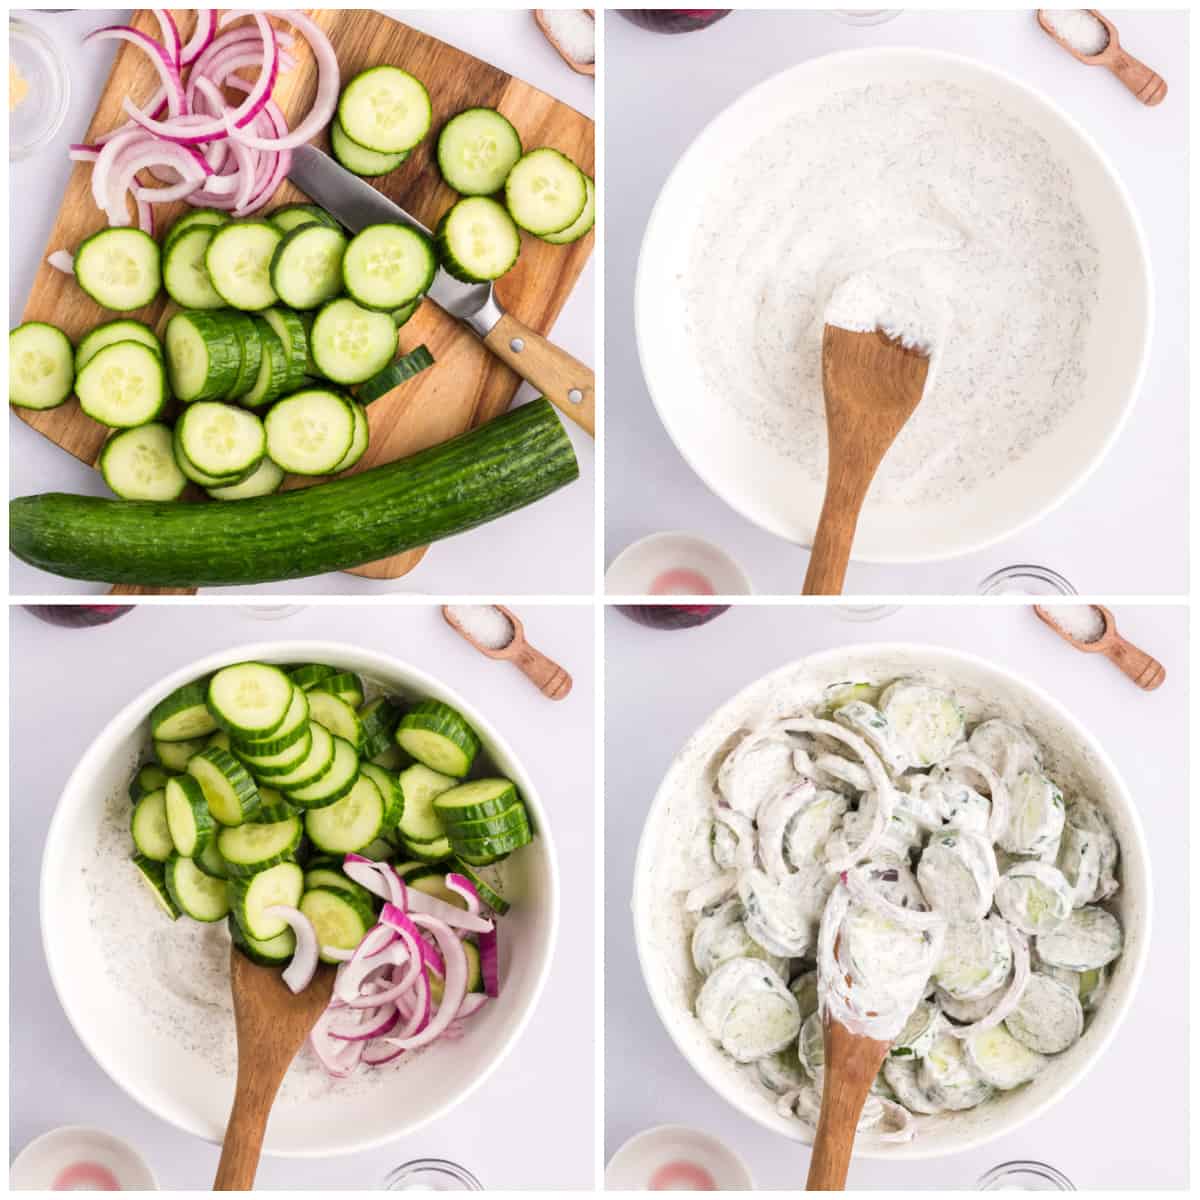 Step by step photos on how to make Creamy Cucumber Salad.